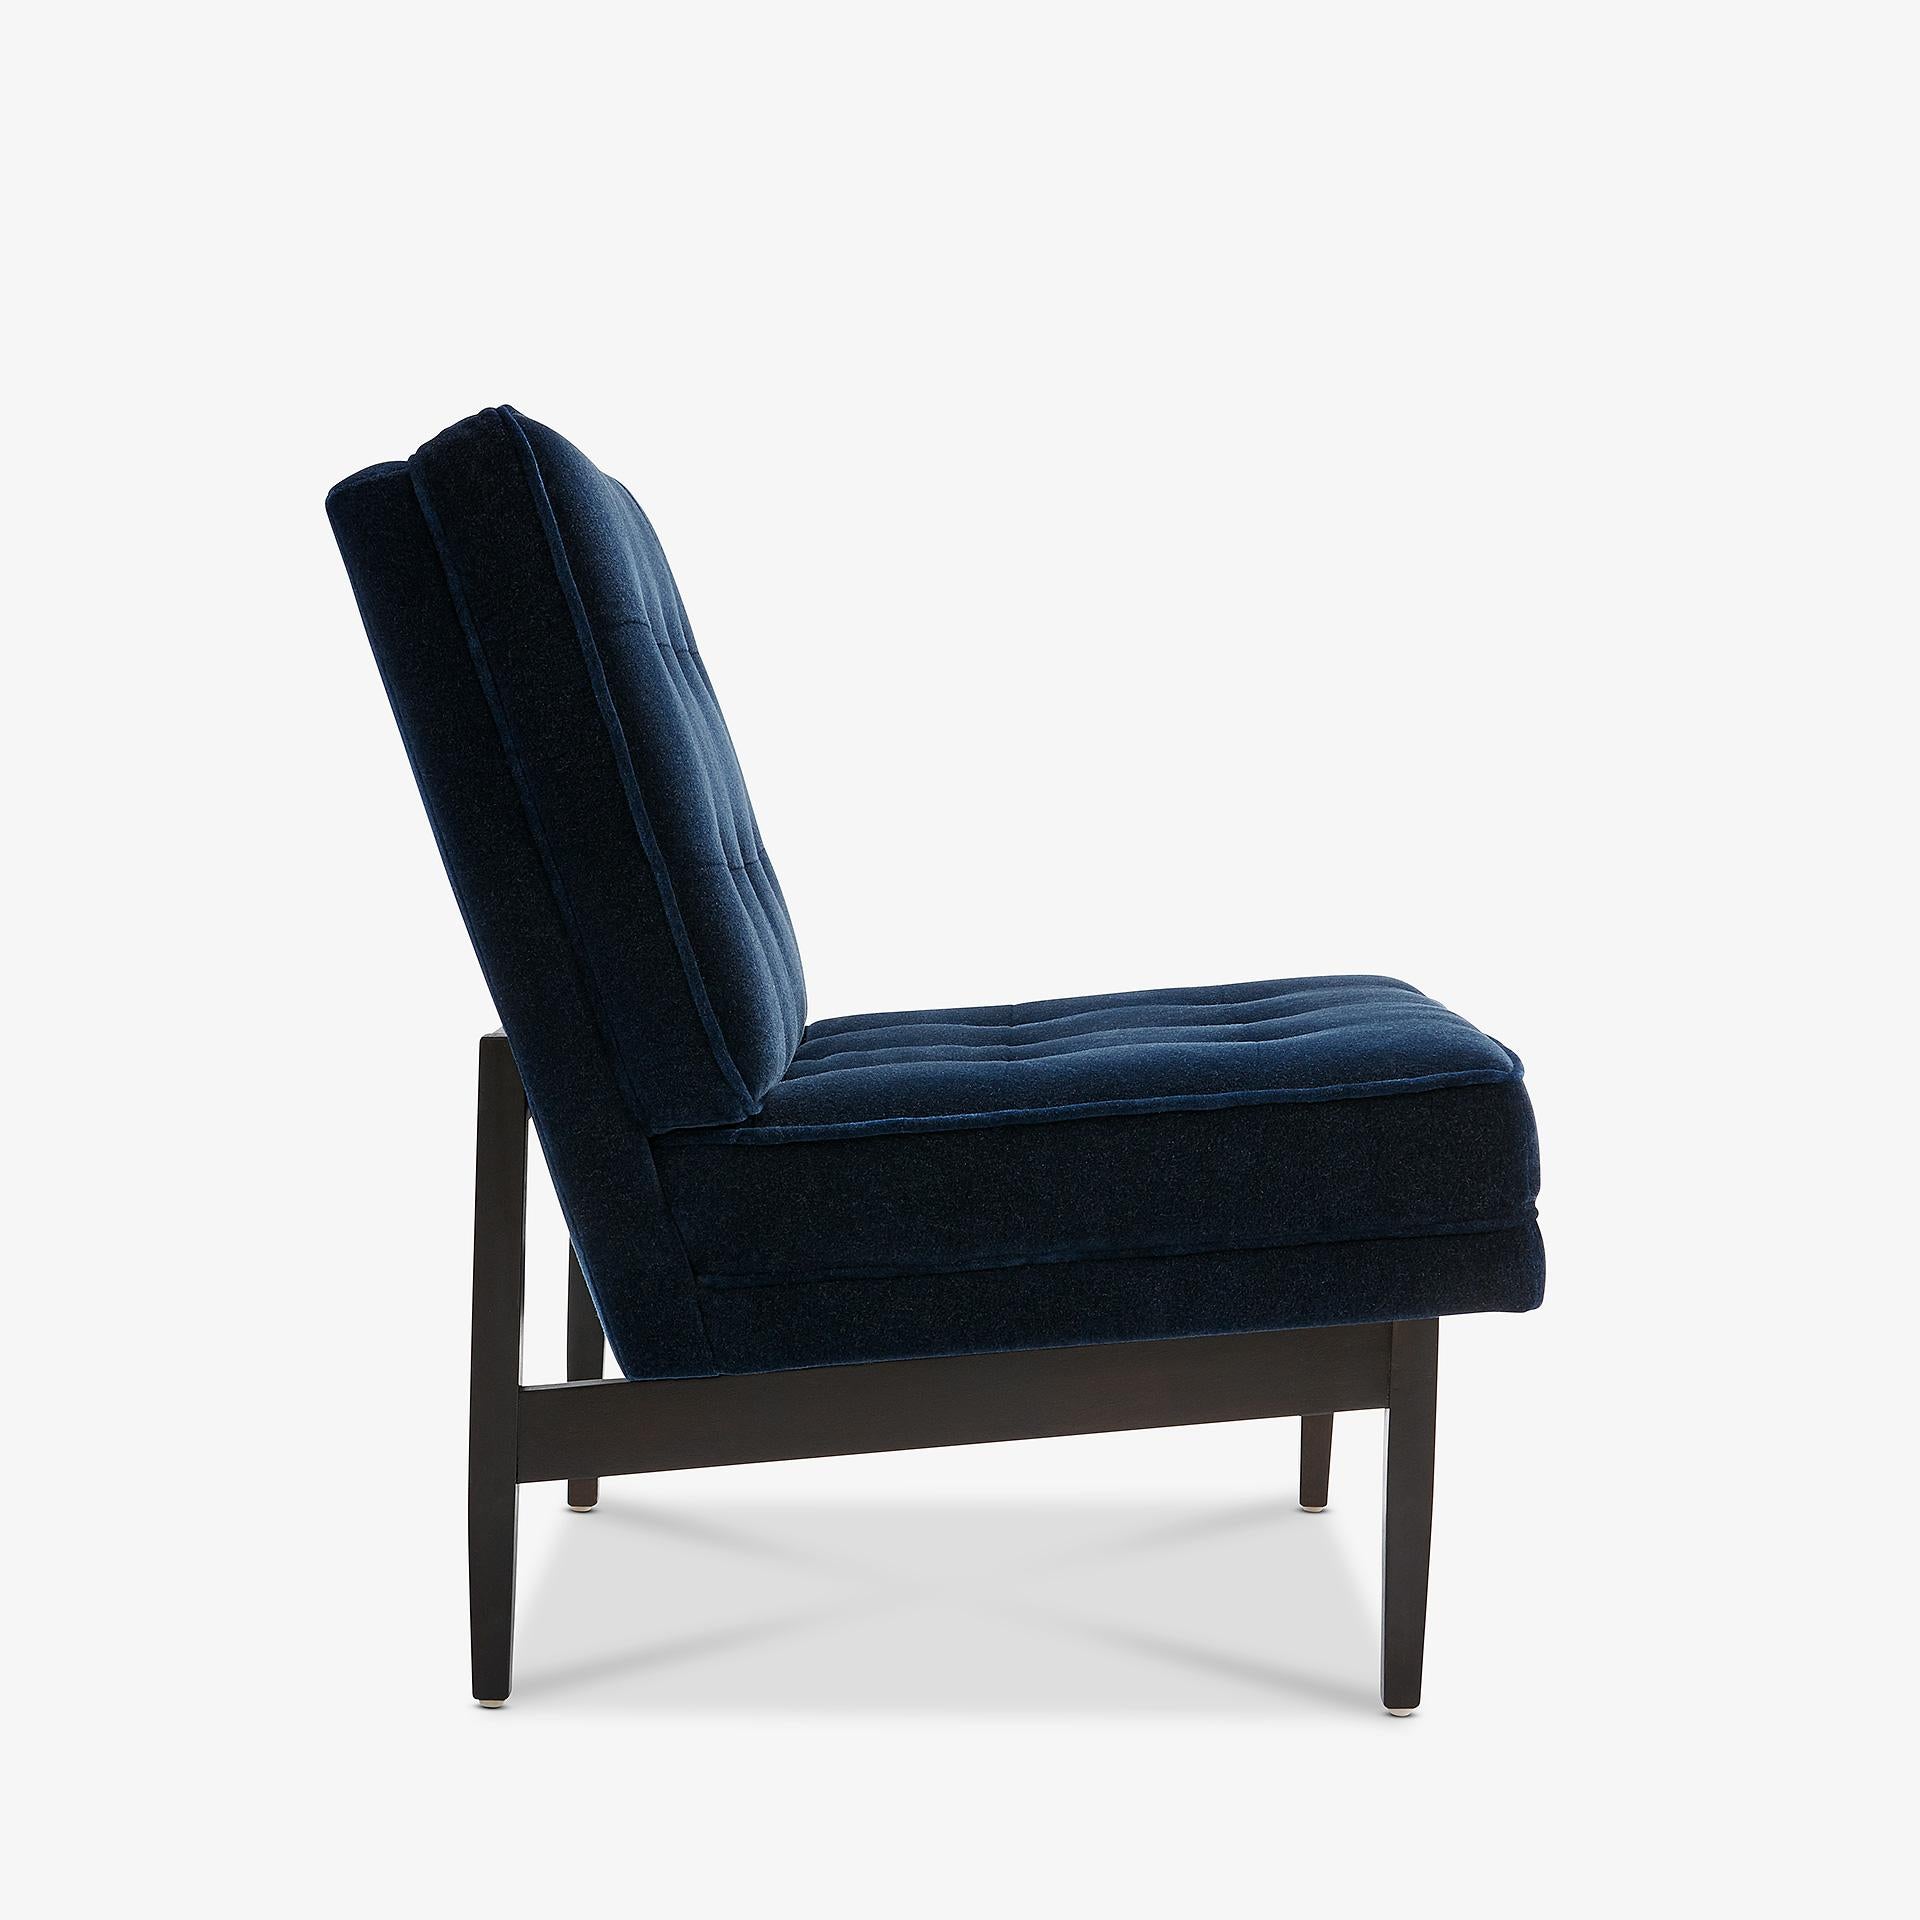 These versatile lounge chairs can work placed separately or together. Shown upholstered in a thick and luxurious prismatic blue mohair, with ebonized black maple wood base and tufted seat and back.

The grm Bespoke V lounger is available COM/COL